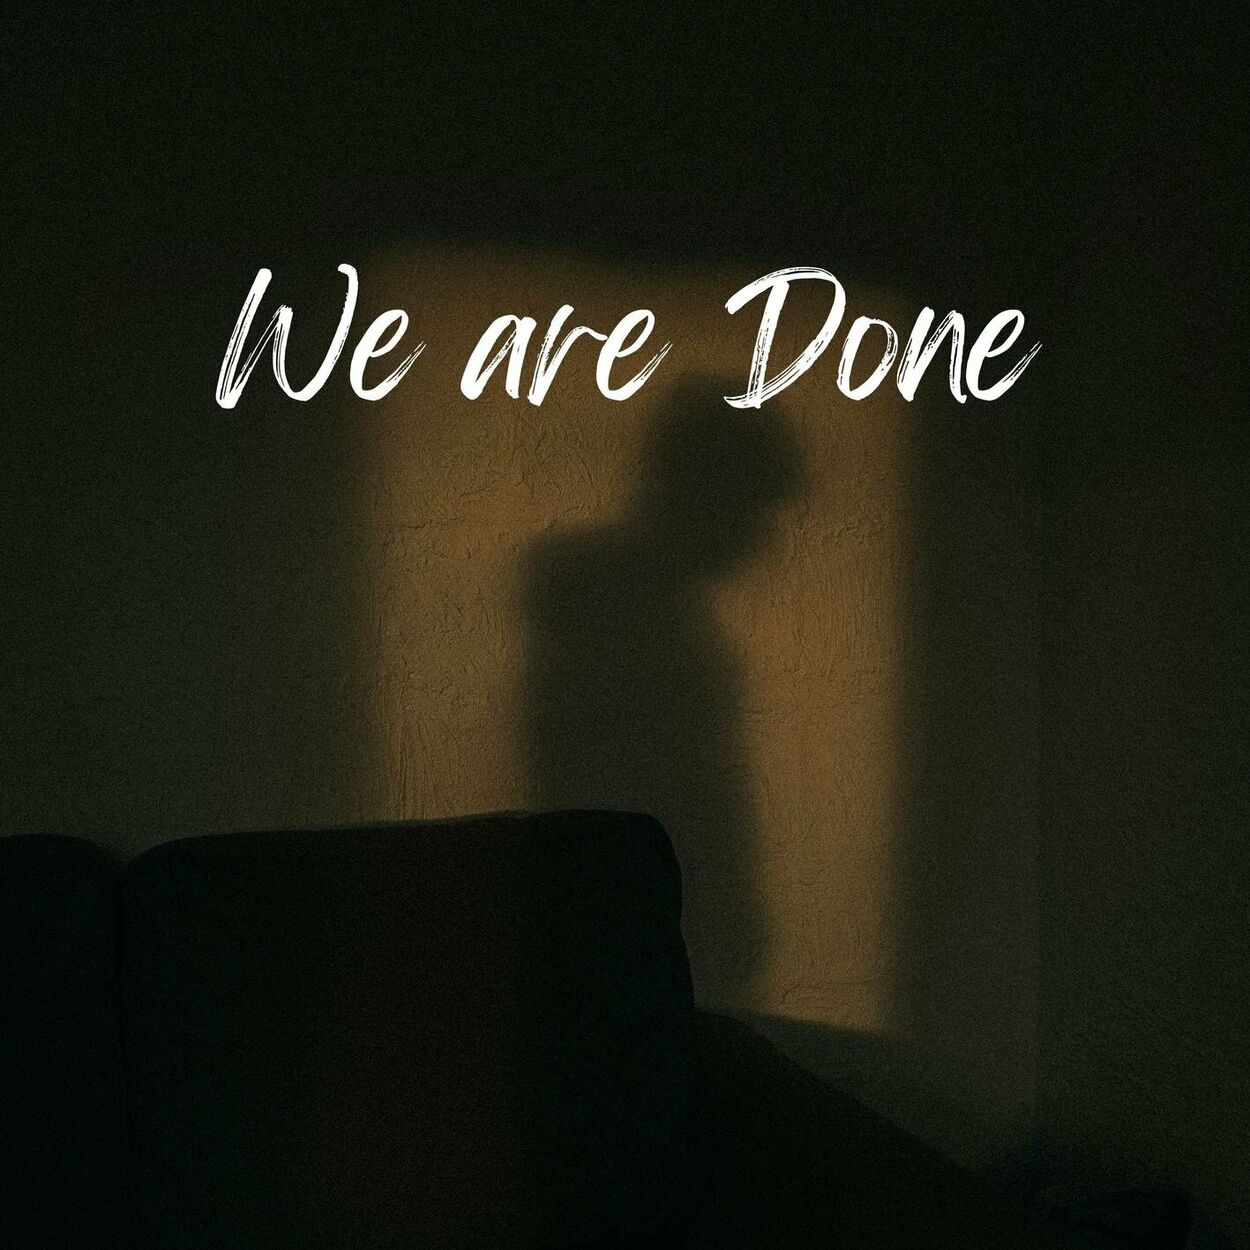 One Room Romance – We are Done – Single